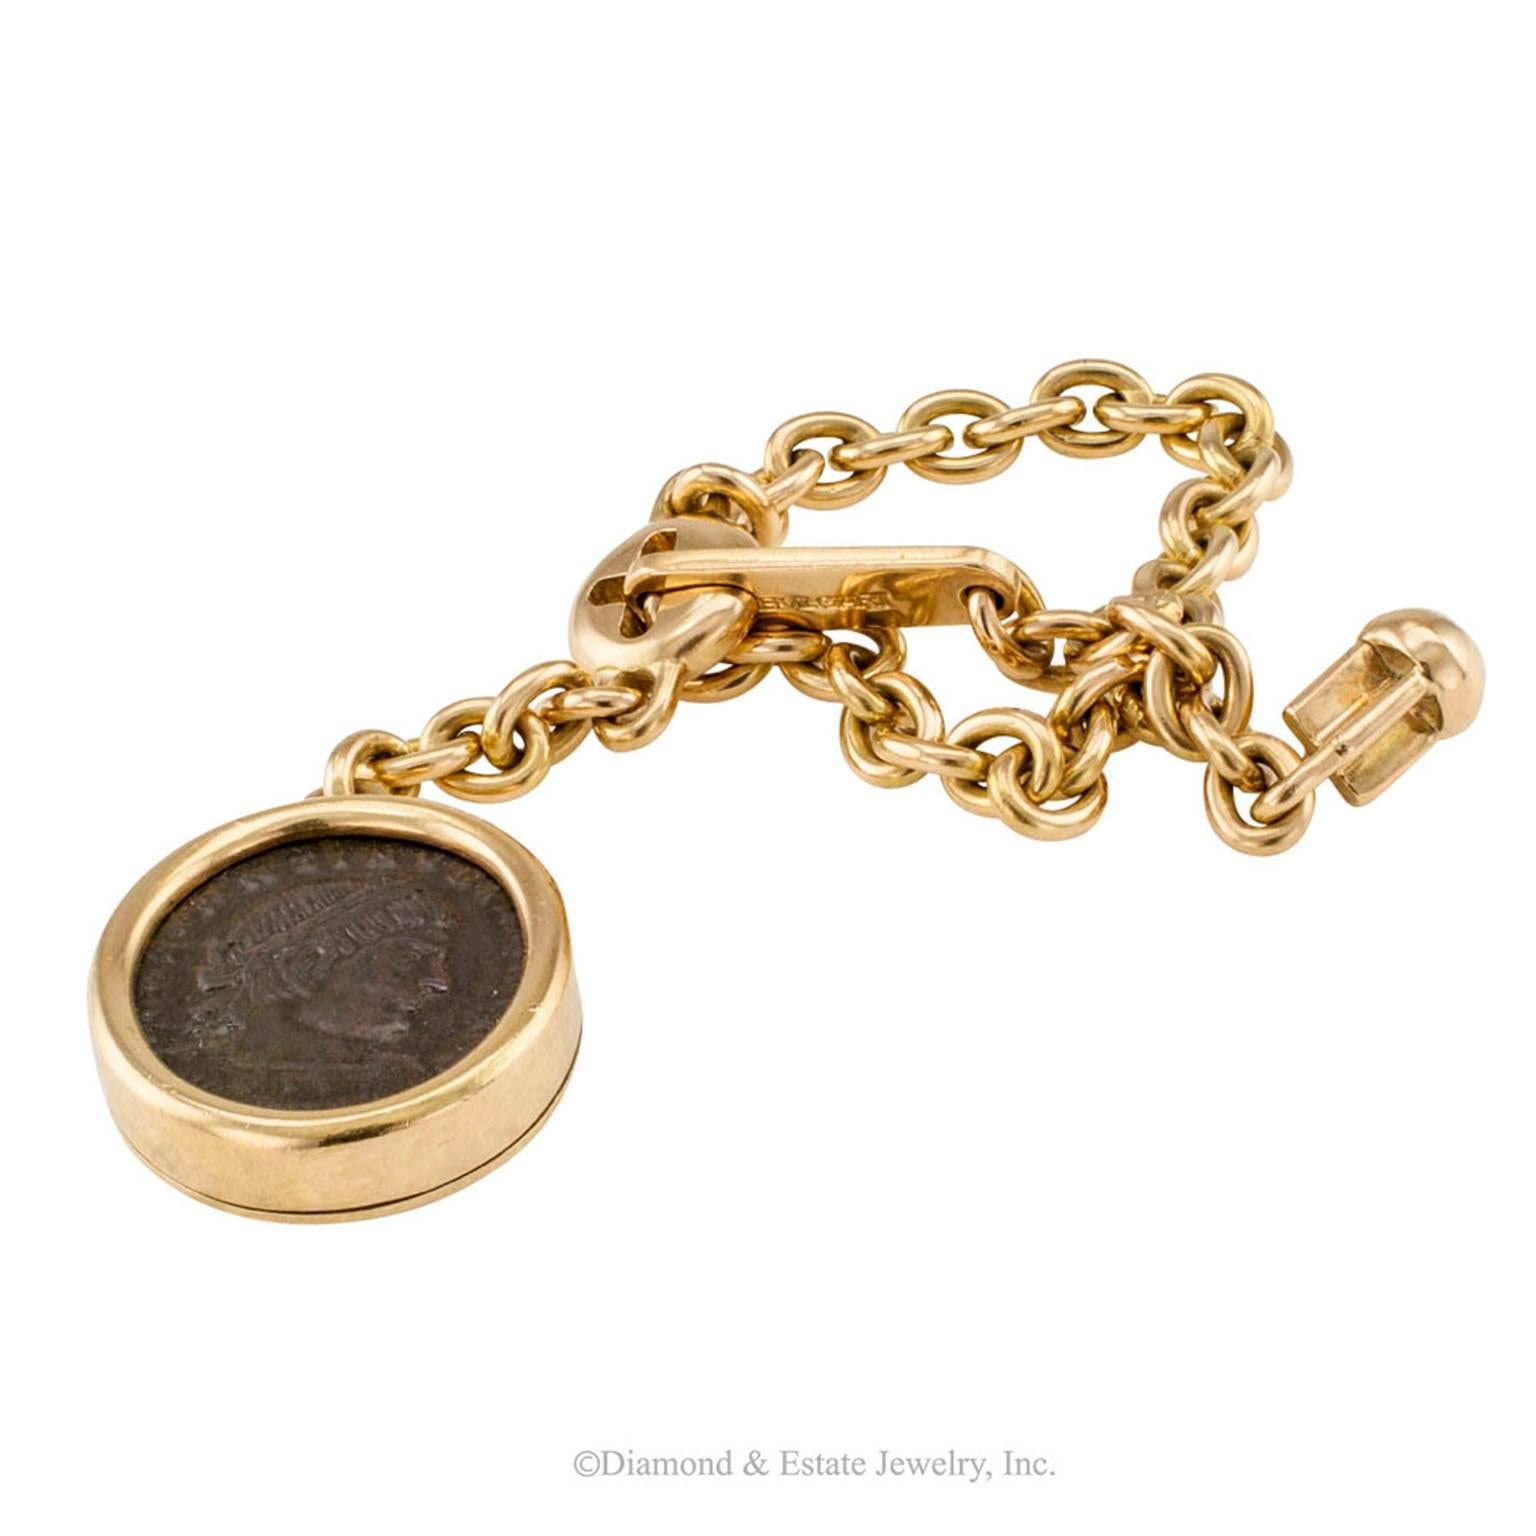 Contemporary Bulgari Gold Keychain with Ancient Roman Coin